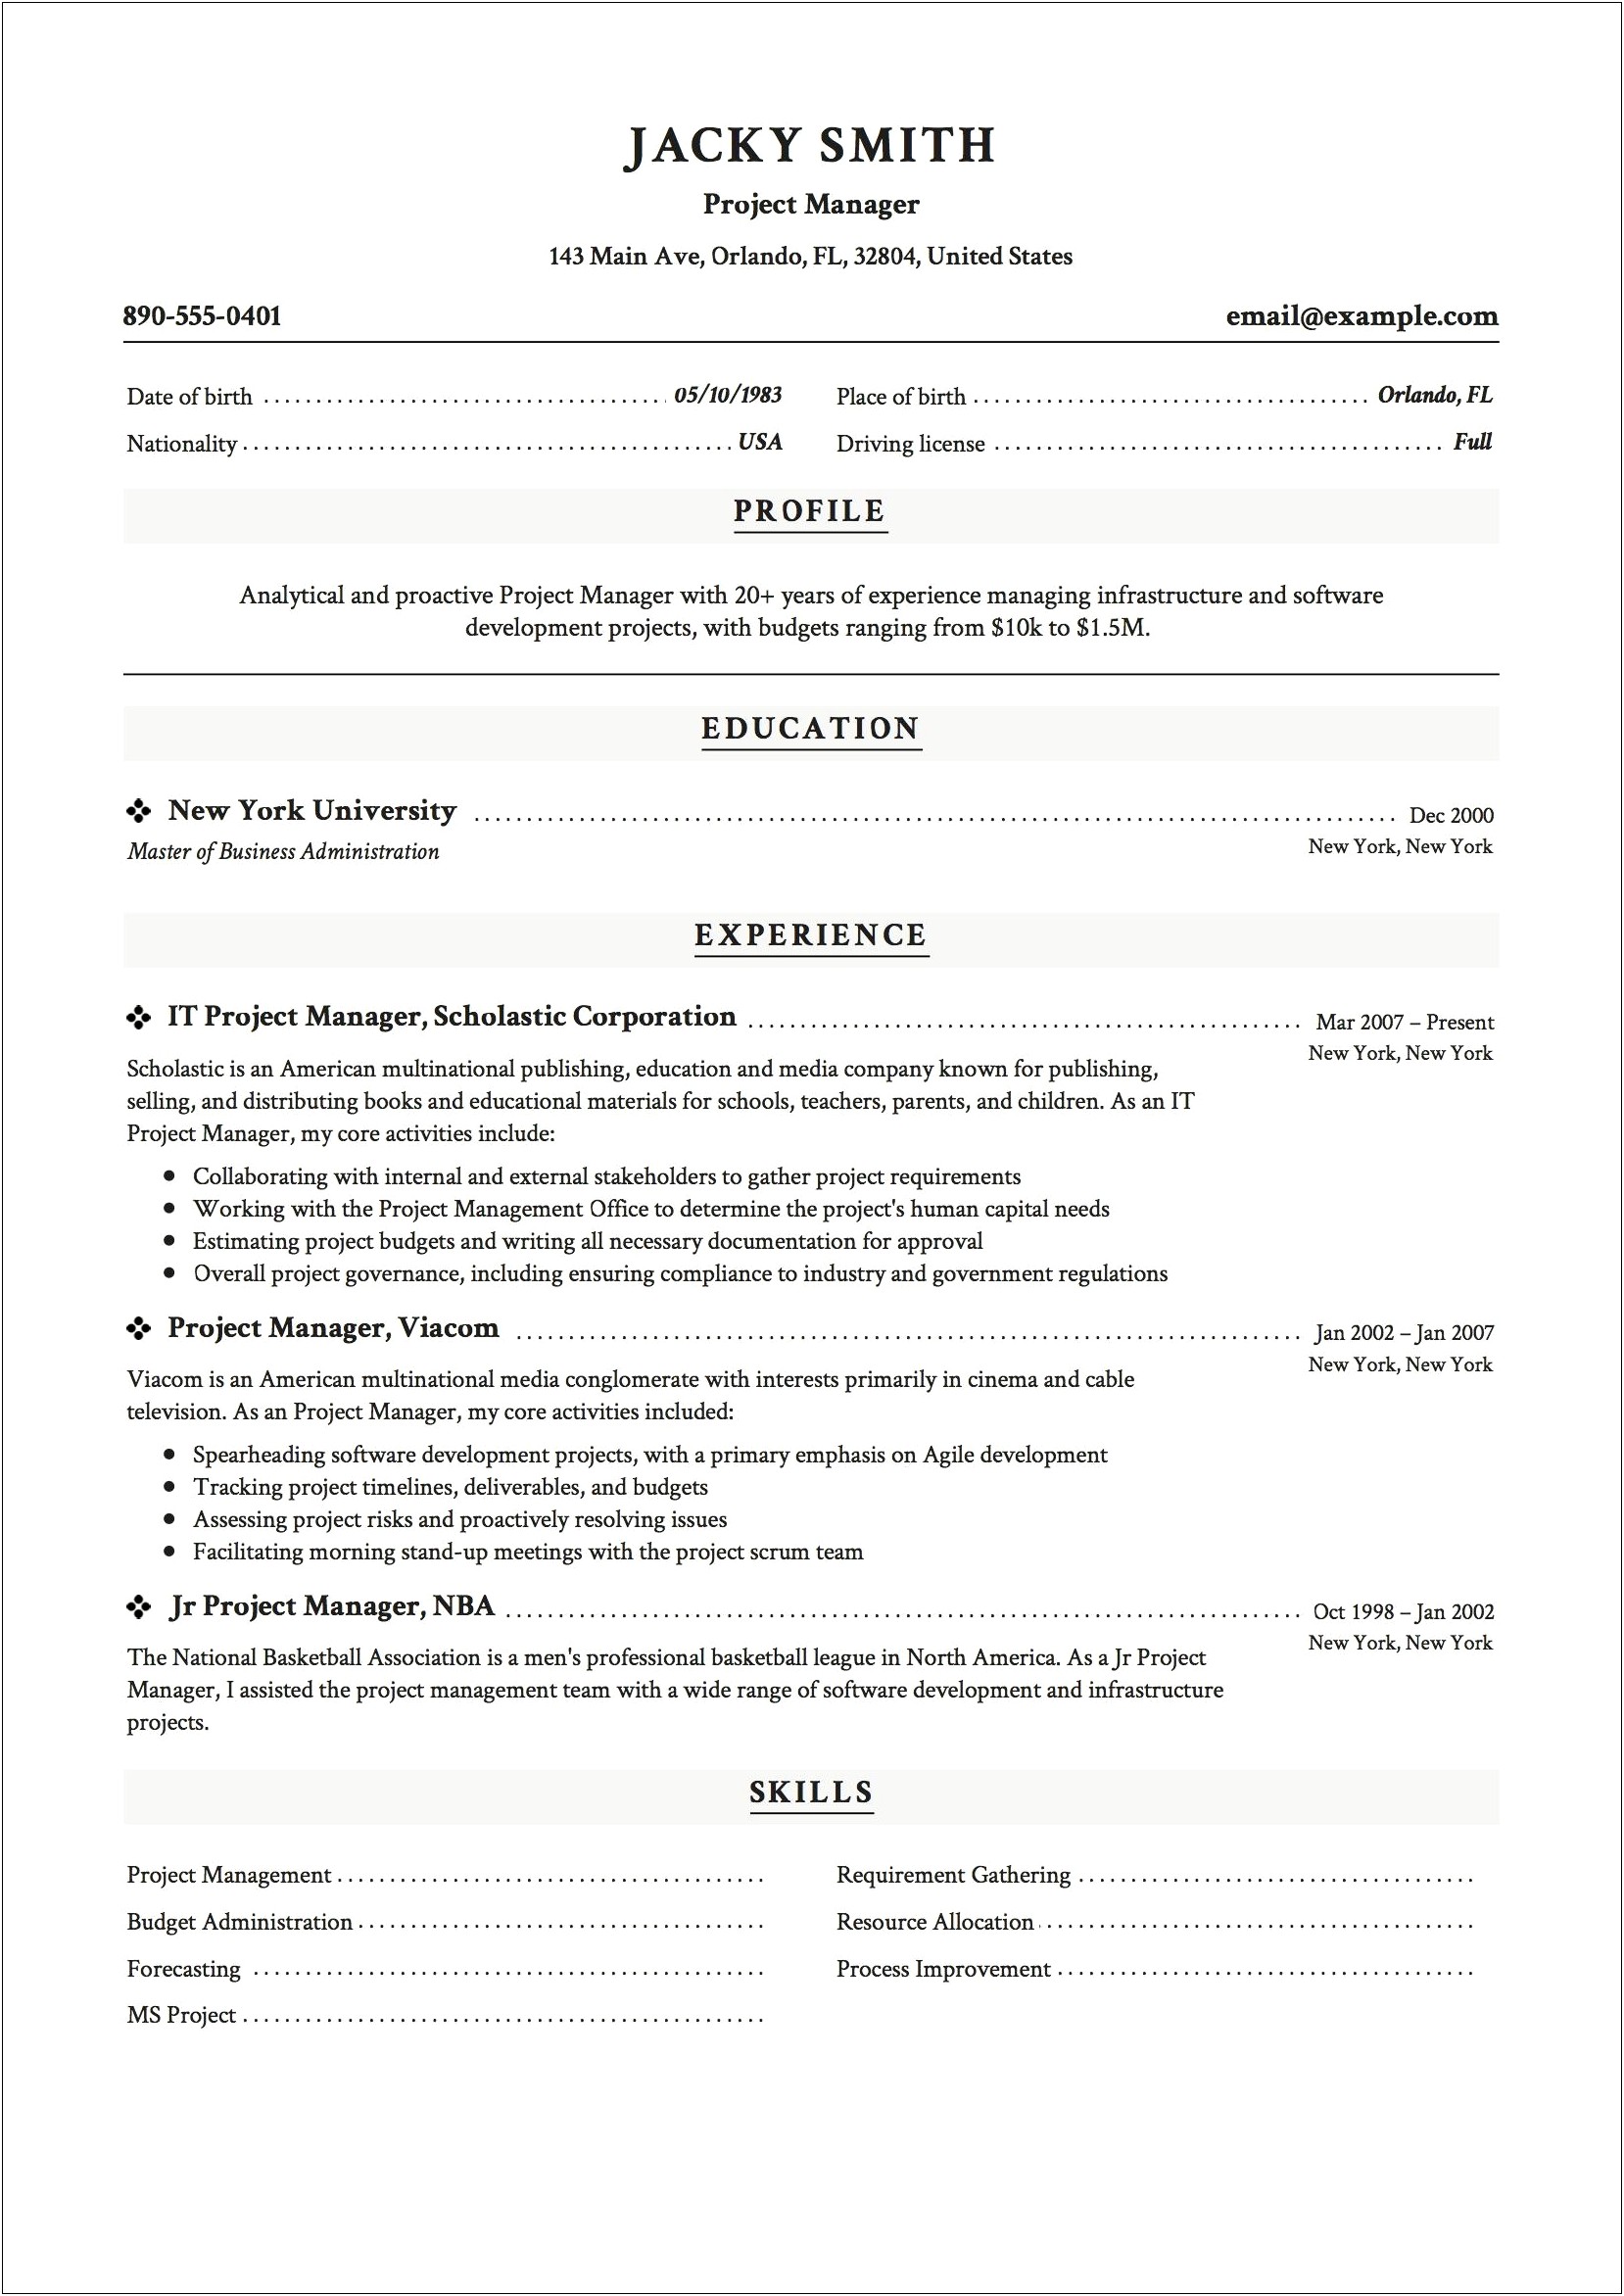 Construction Management Project Management Resume Examples